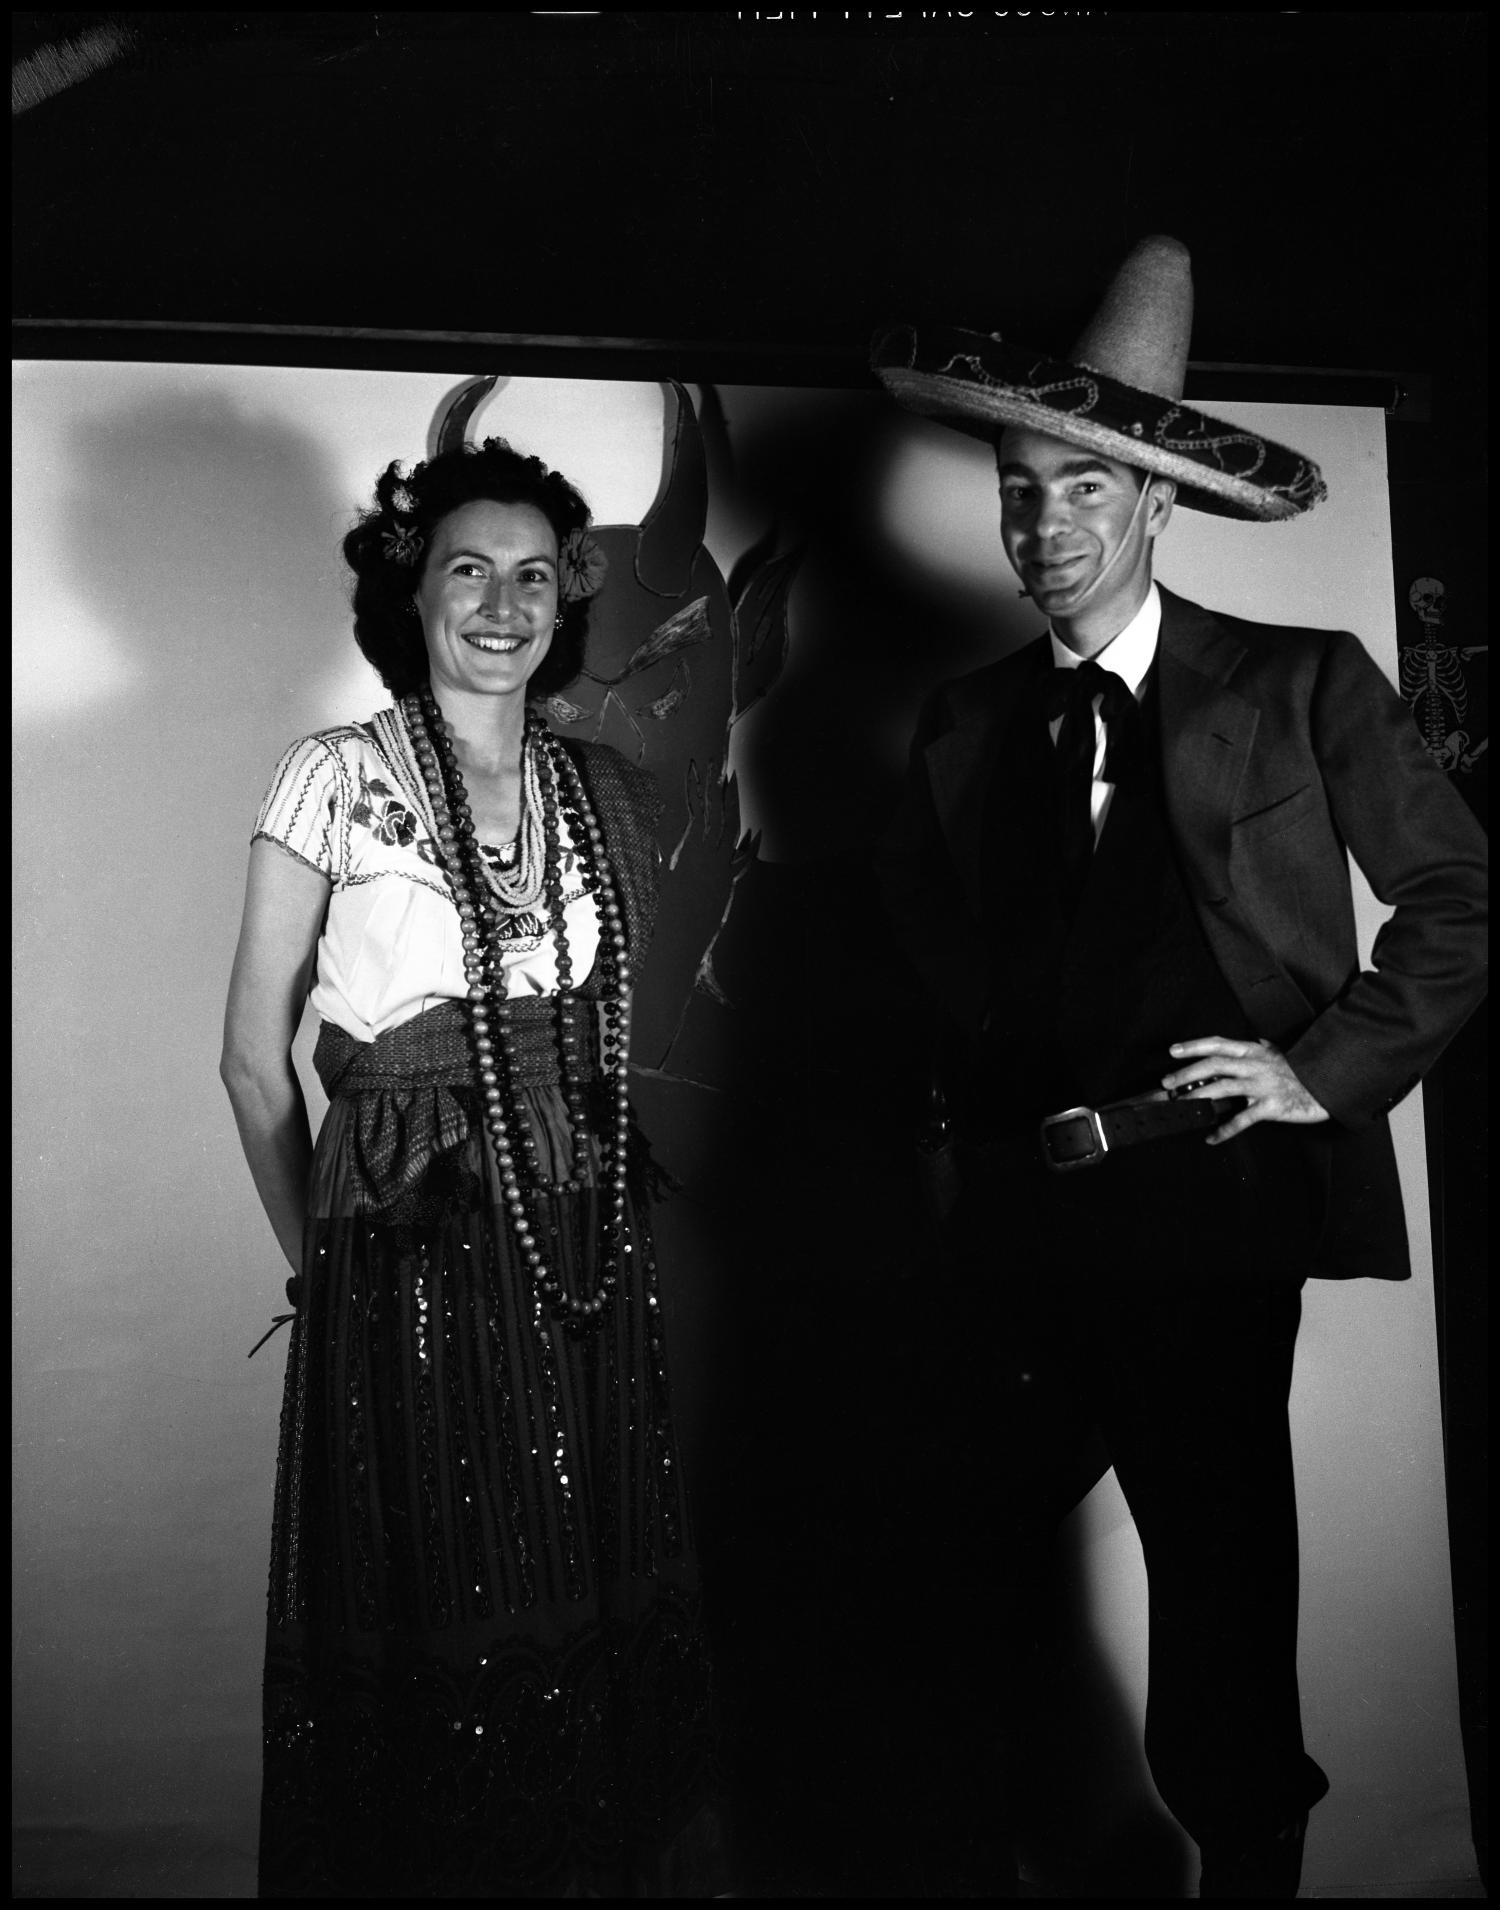 [Dr. C.E. Shuford in a sombrero posing with unidentified woman]
                                                
                                                    [Sequence #]: 1 of 1
                                                